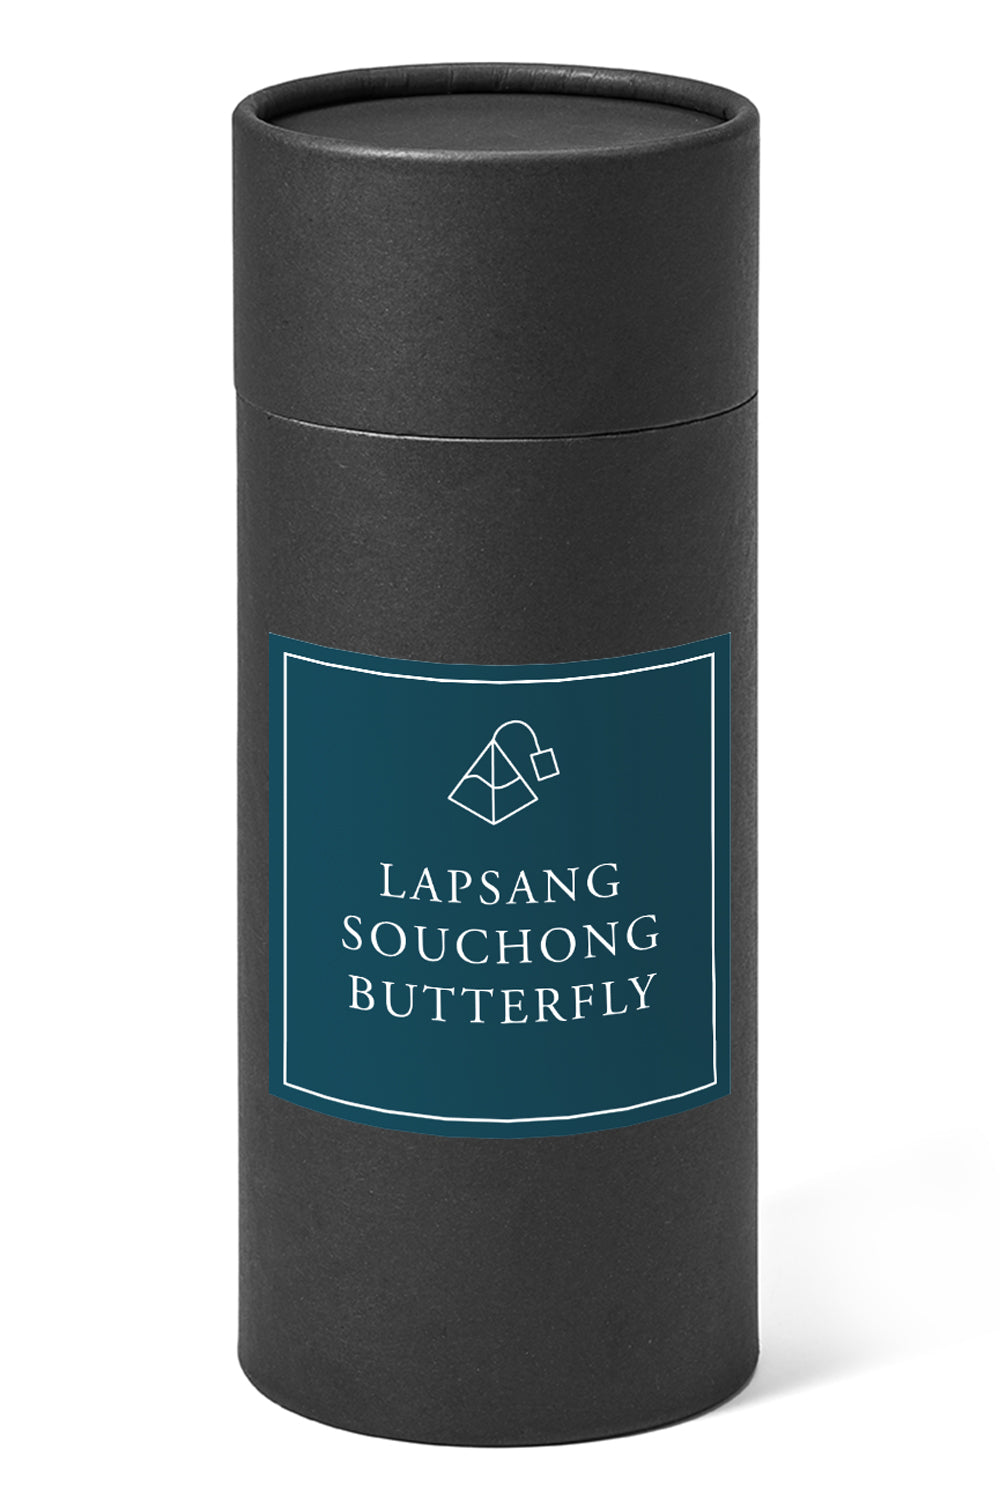 Lapsang Souchong Butterfly (pyramid bags)-40 pyramids gift-Loose Leaf Tea-High Teas